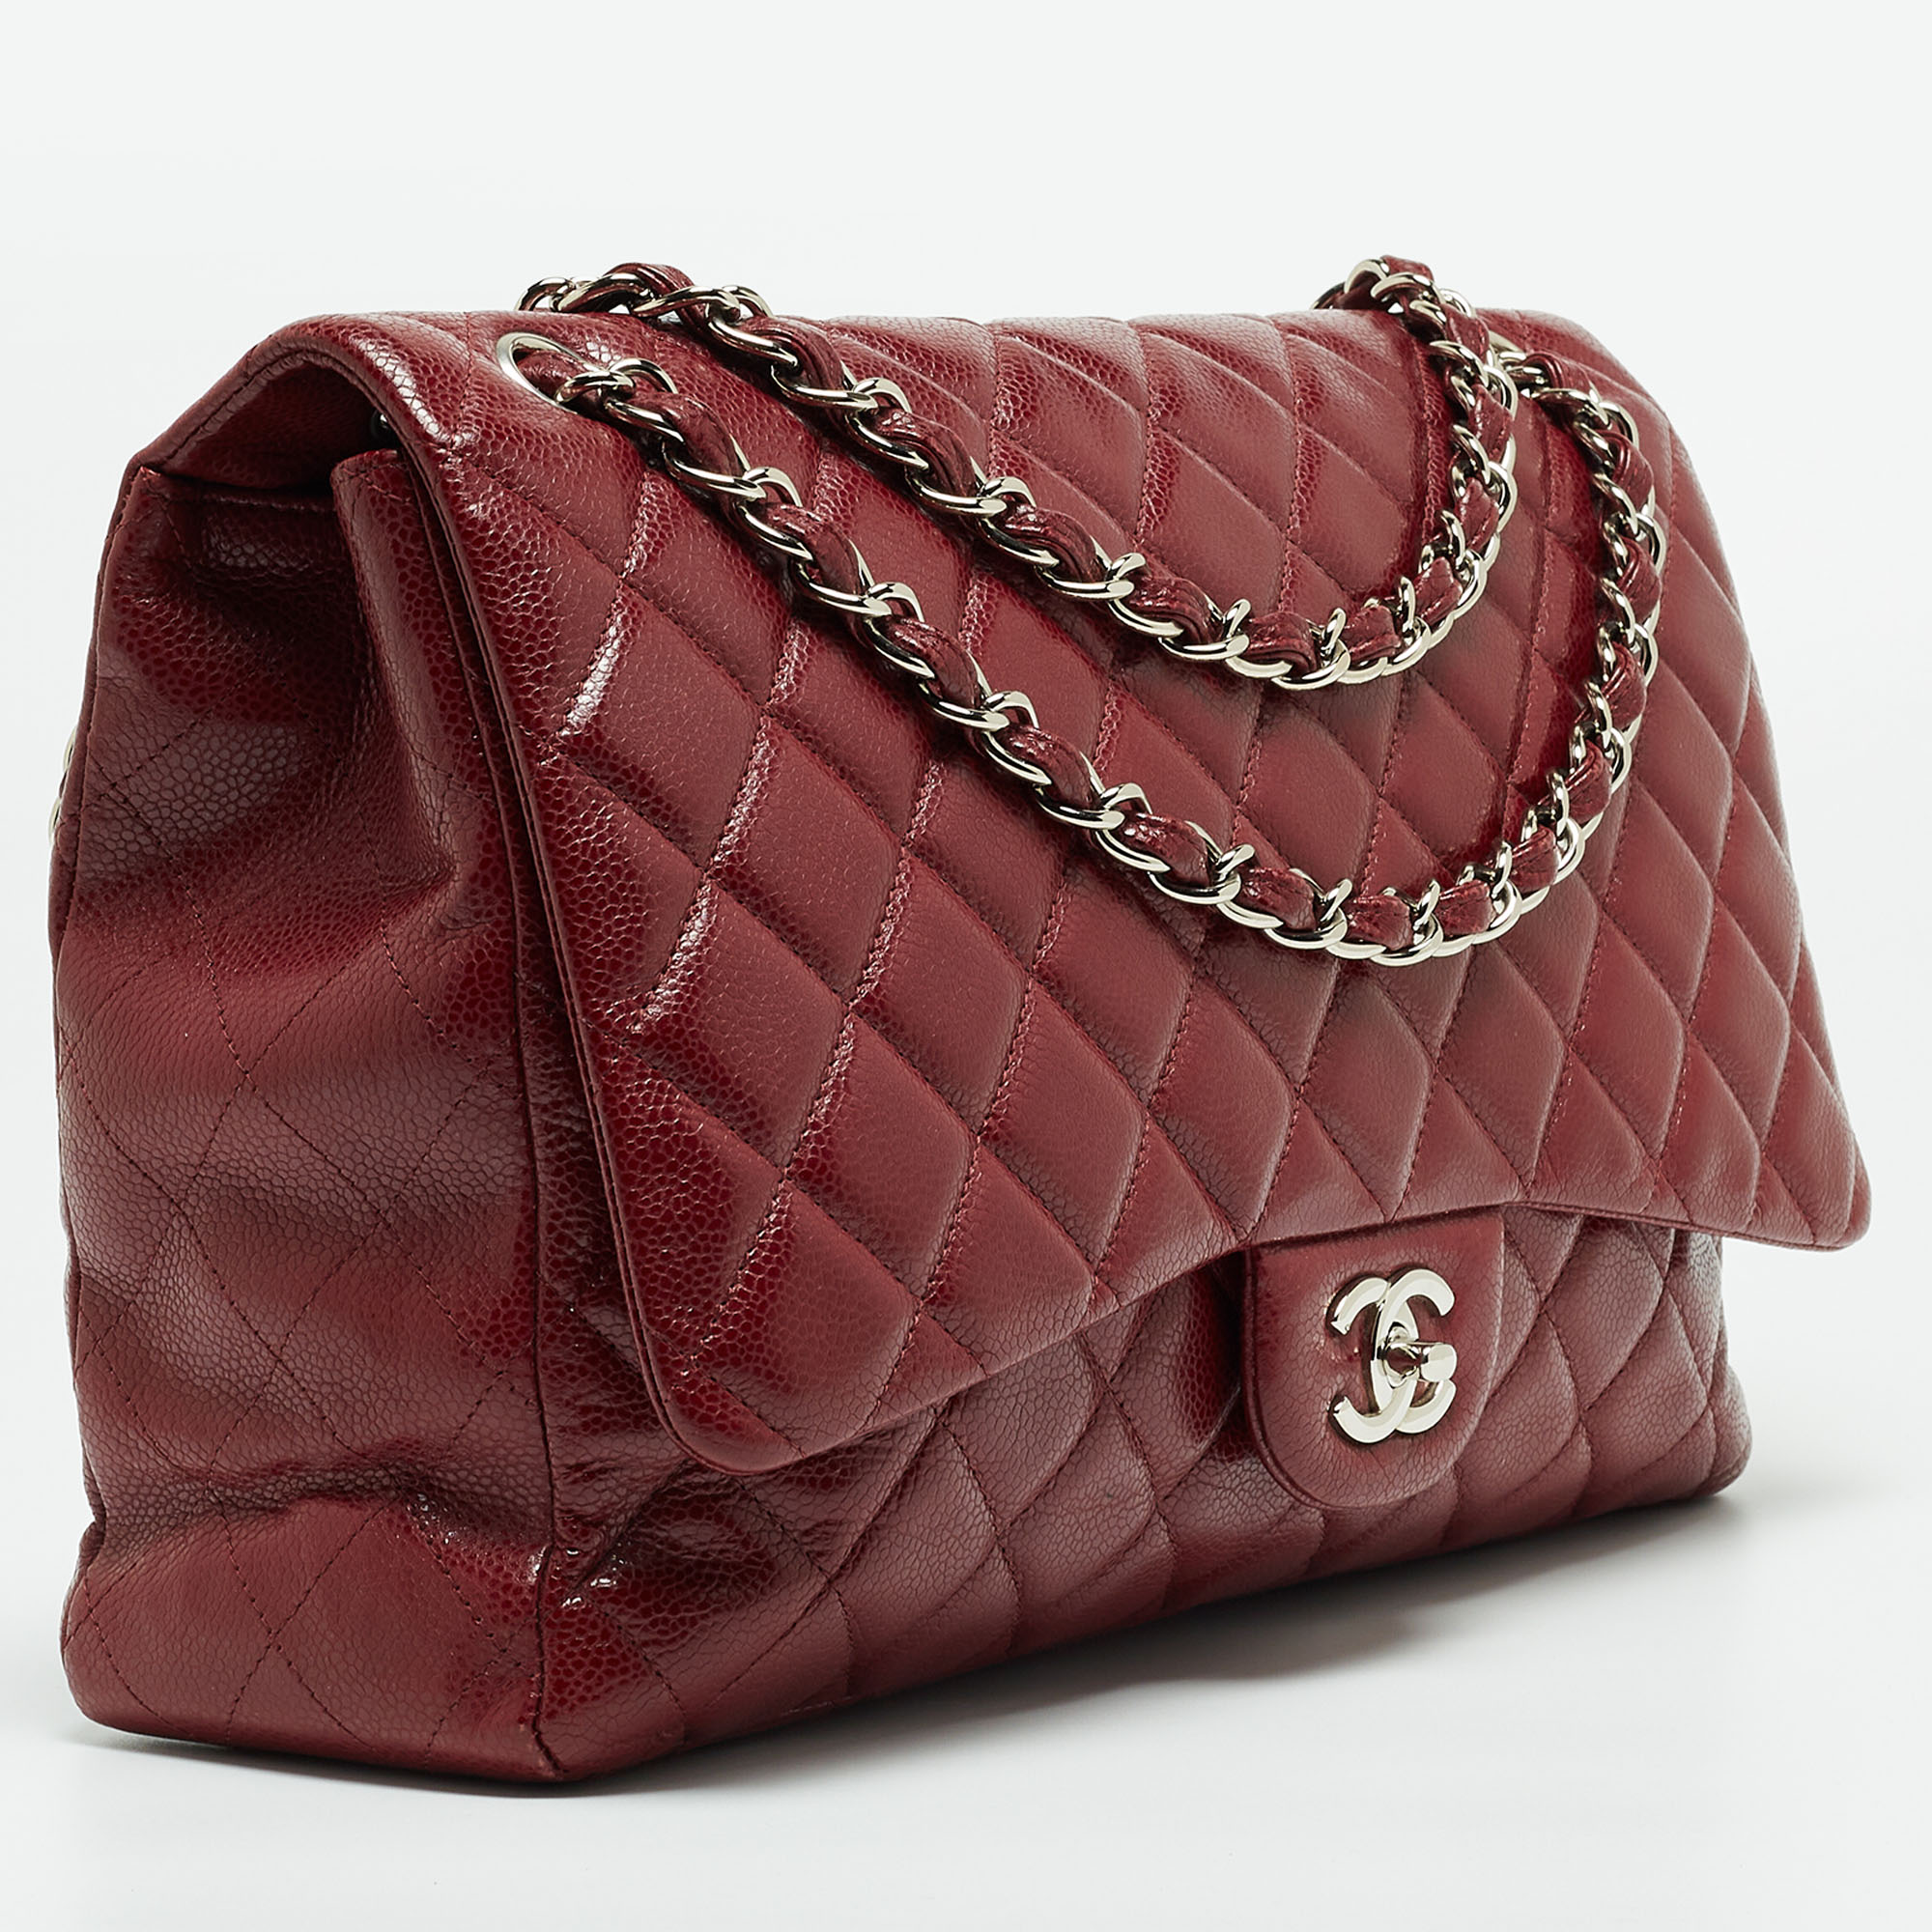 Chanel Burgundy Quilted Caviar Leather Maxi Classic Single Flap Bag